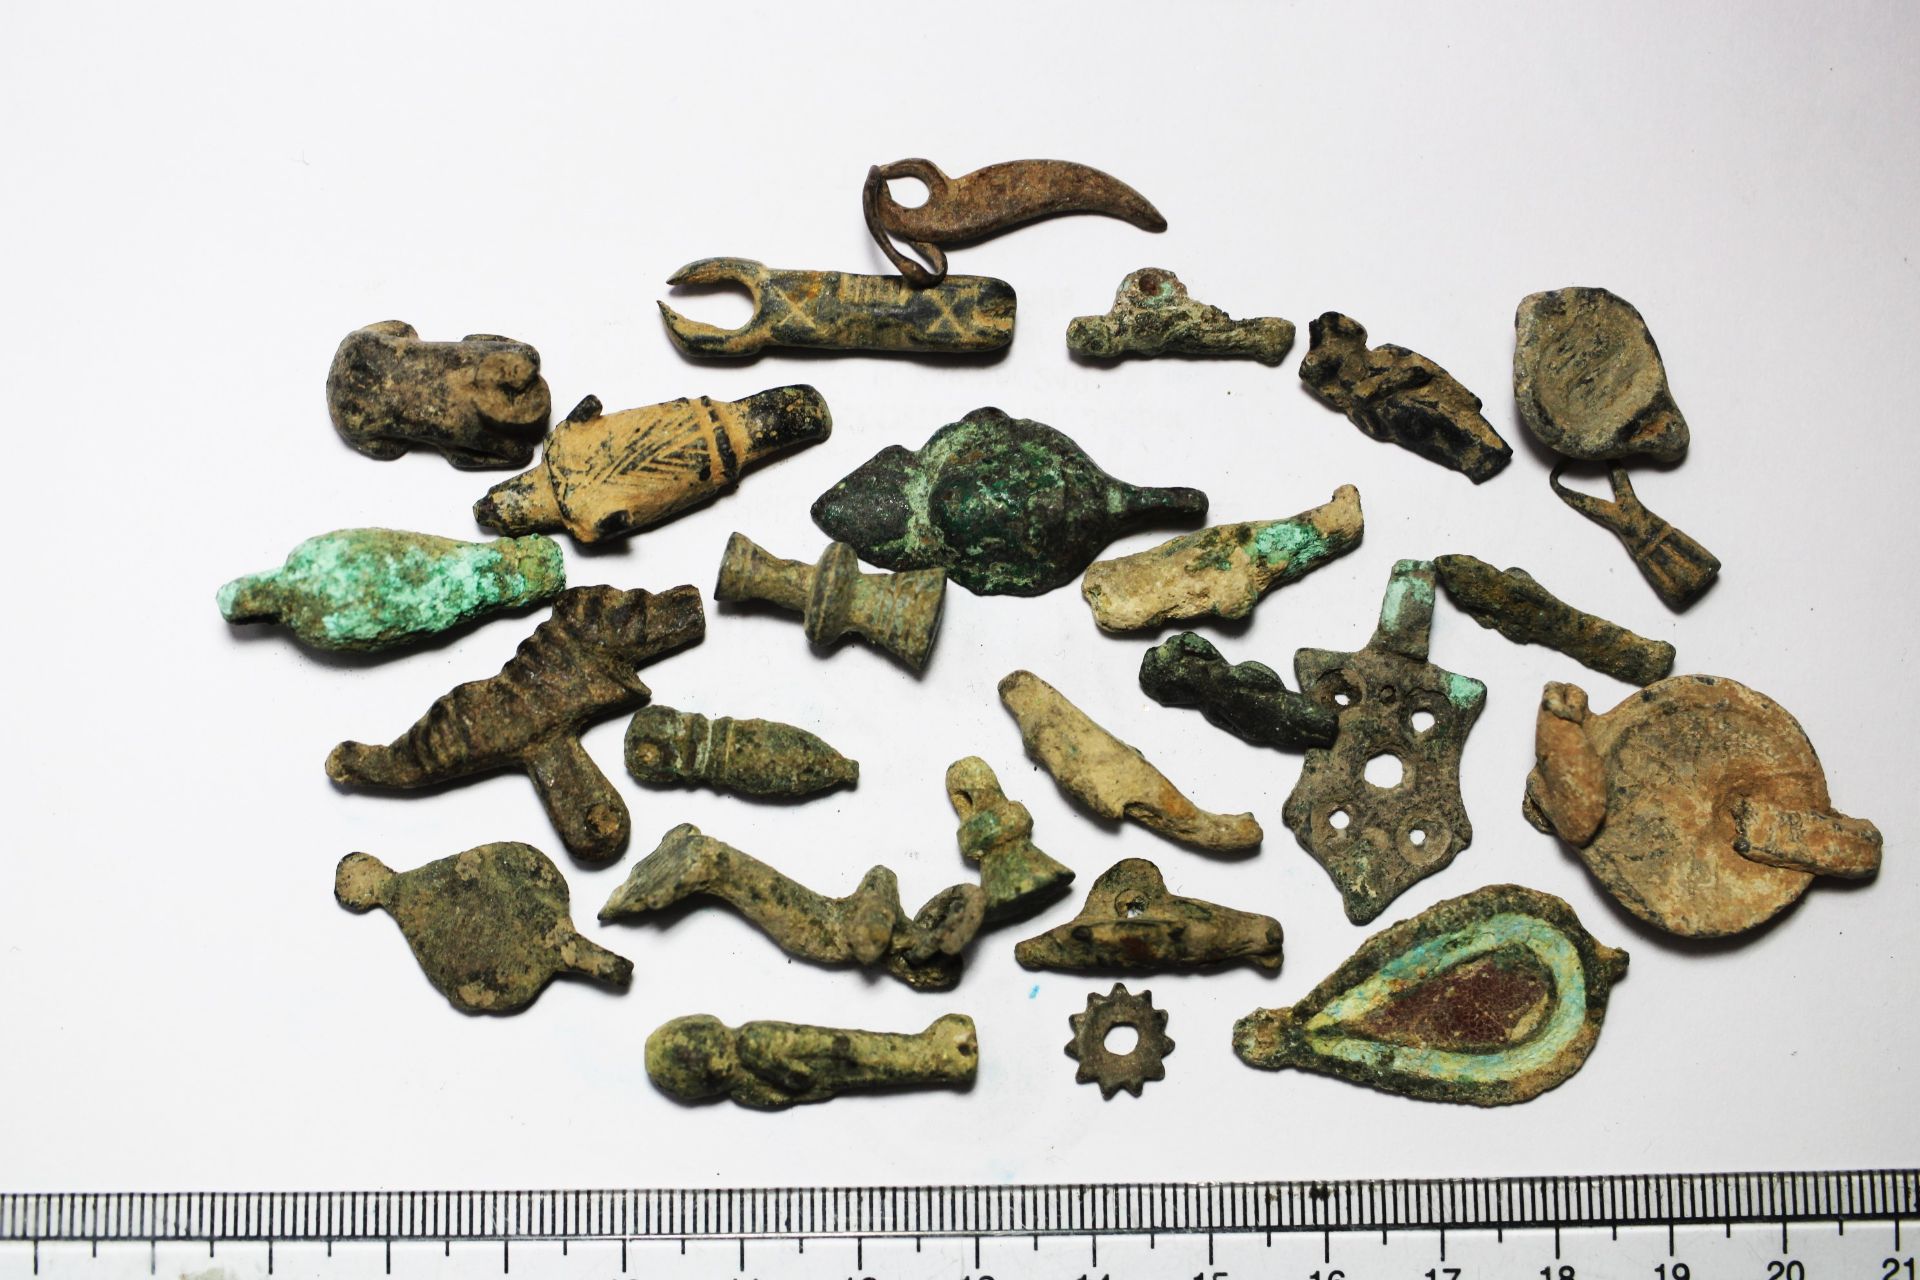 Acropolo. ROMAN GROUP OF 28 SMALL BRONZE ARTEFACTS & AMULETS. 200 - 300 A.D